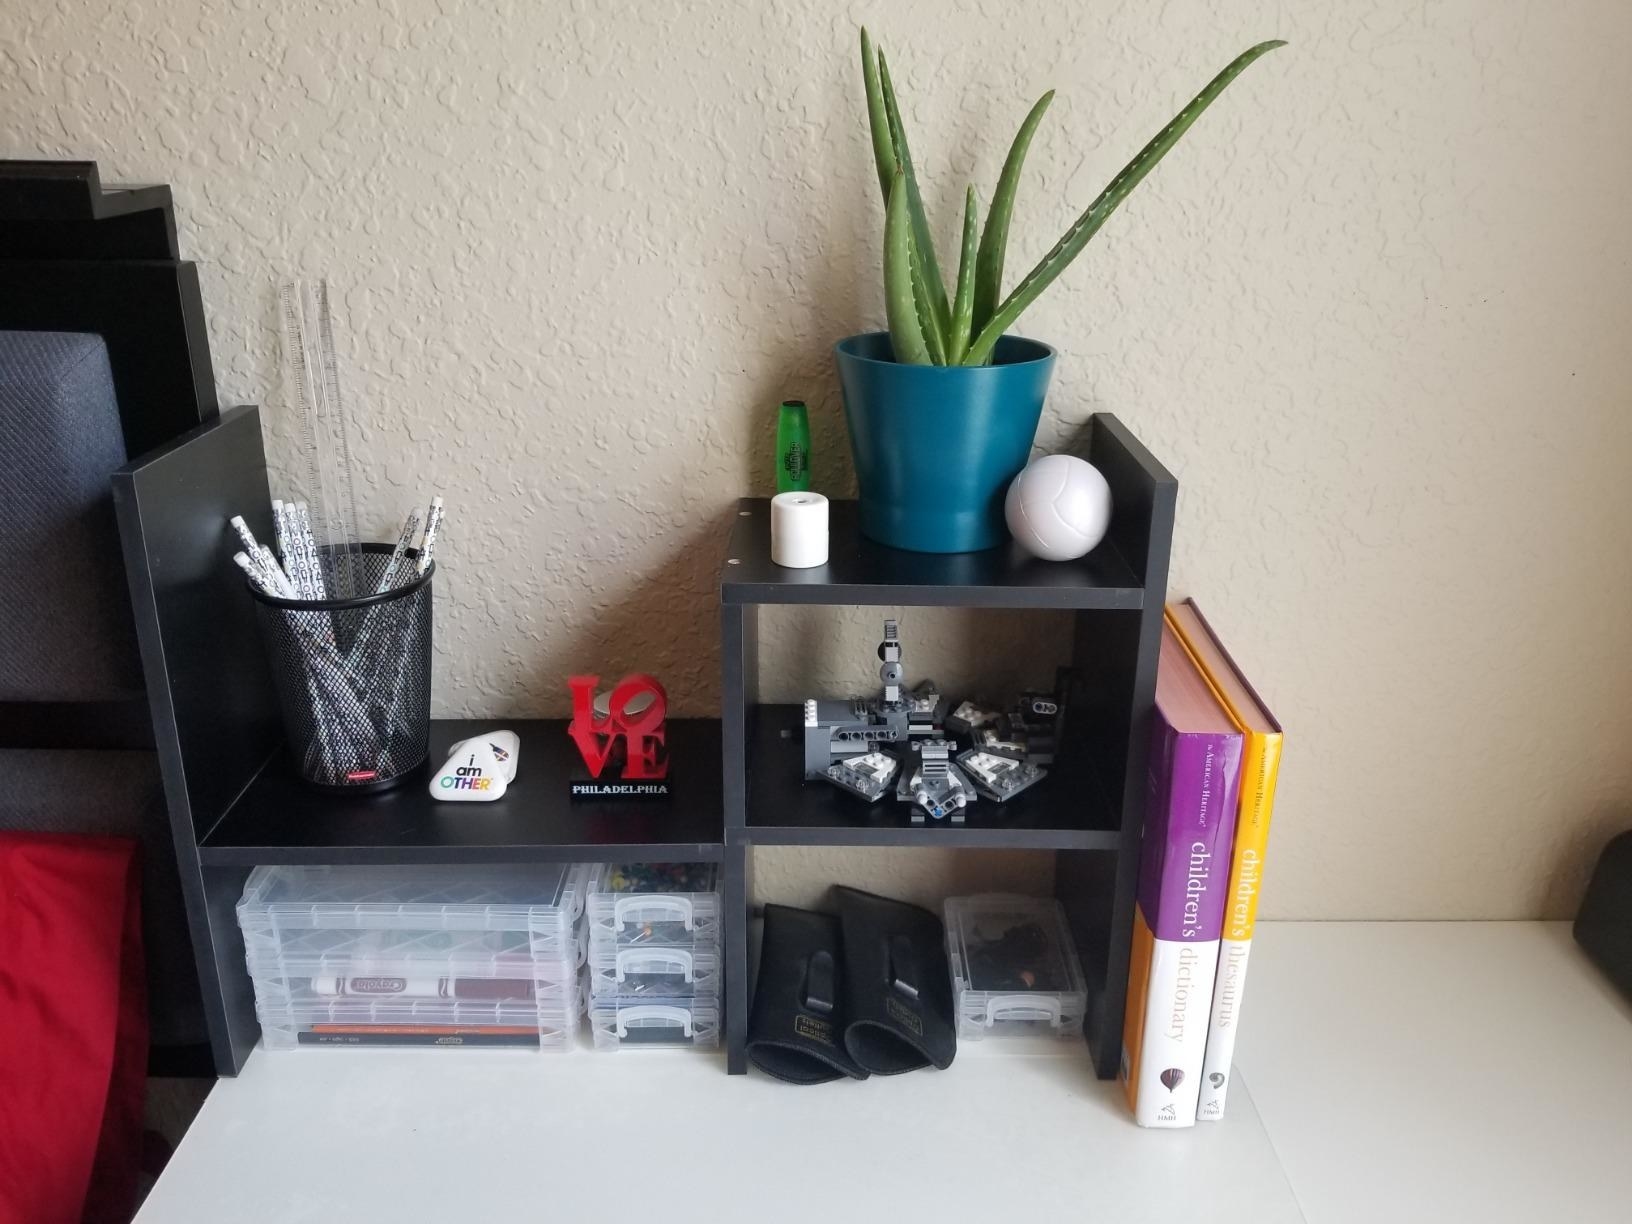 the black desk organizer with books, plants and pens organized in the different compartments